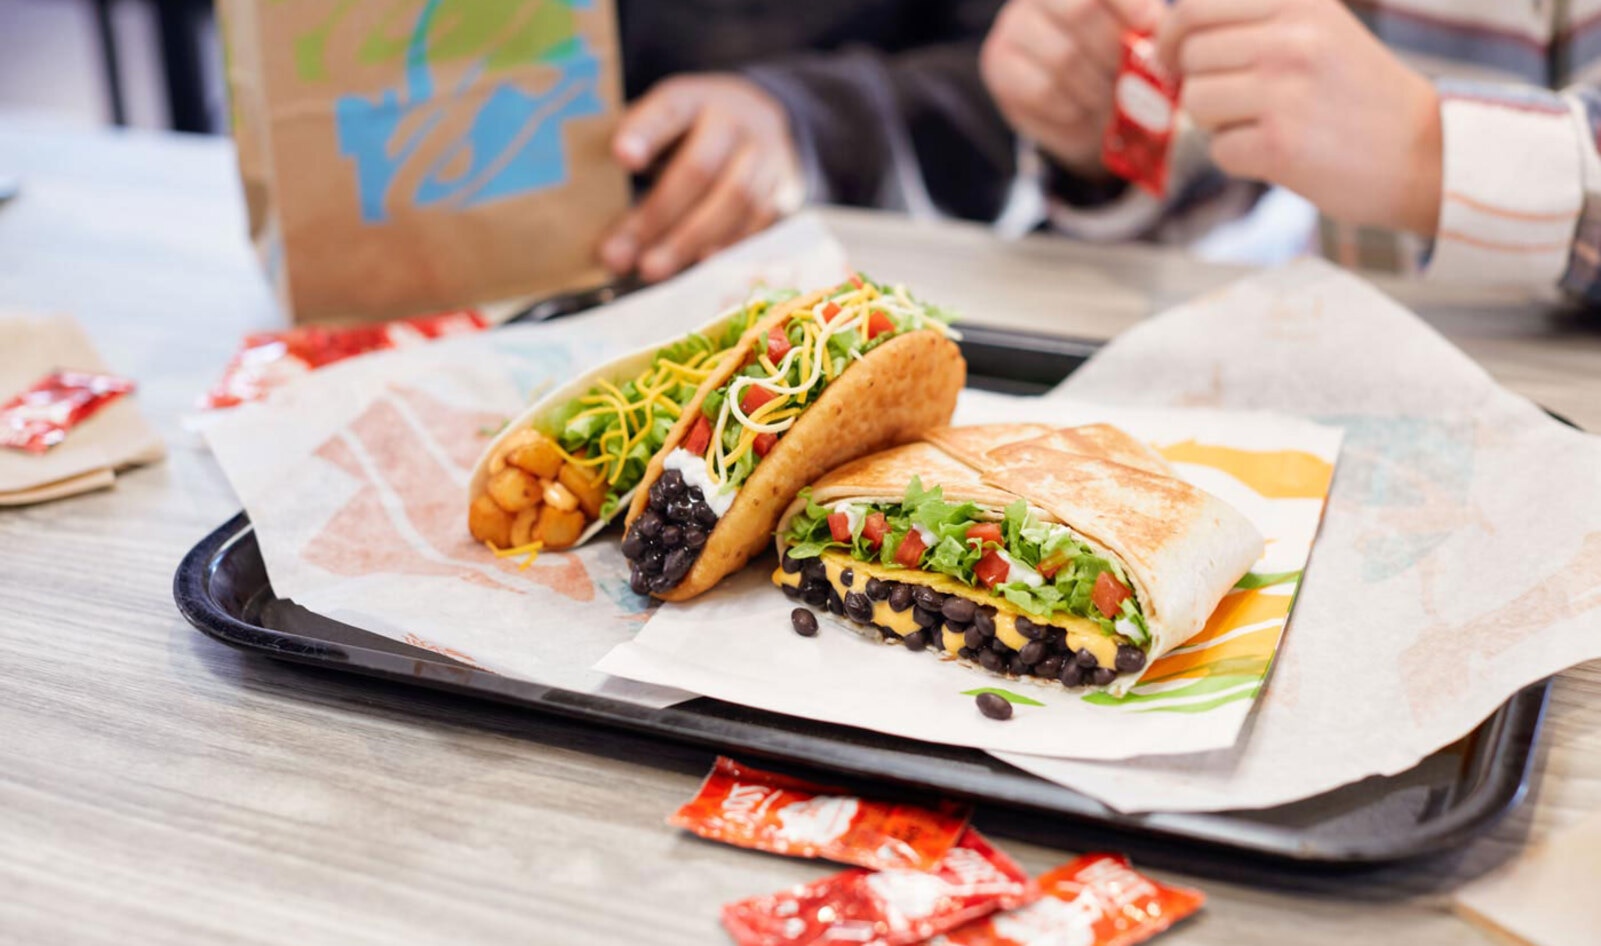 Taco Bell Launches Its Veggie Meal for 2 Deal. But There’s a Catch.